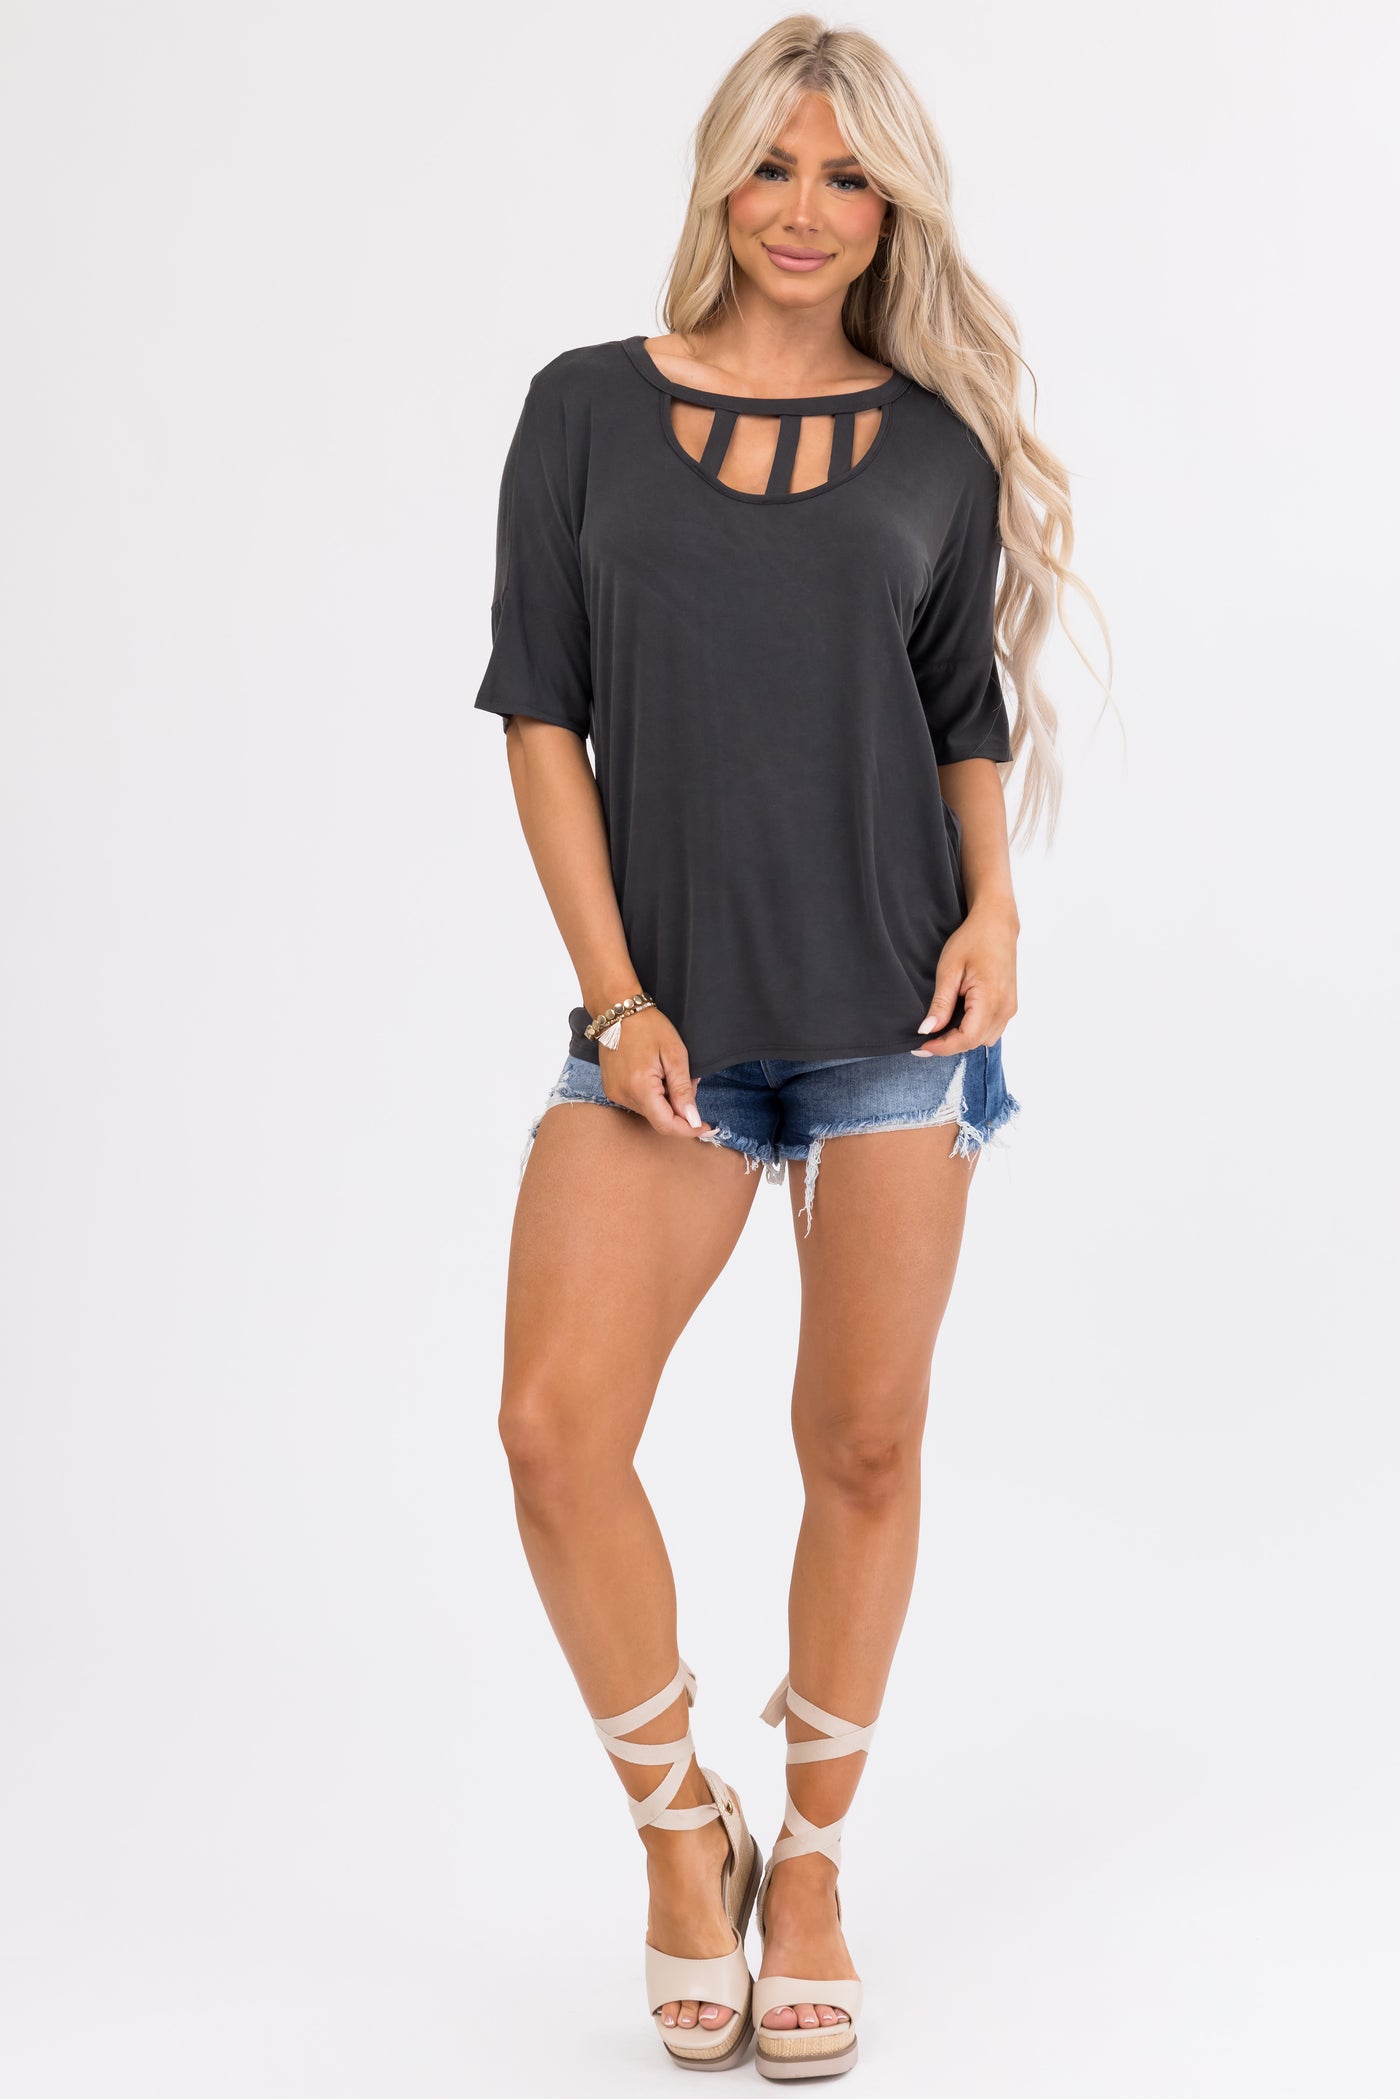 Charcoal Half Sleeve Knit Top with Chest Cut Outs